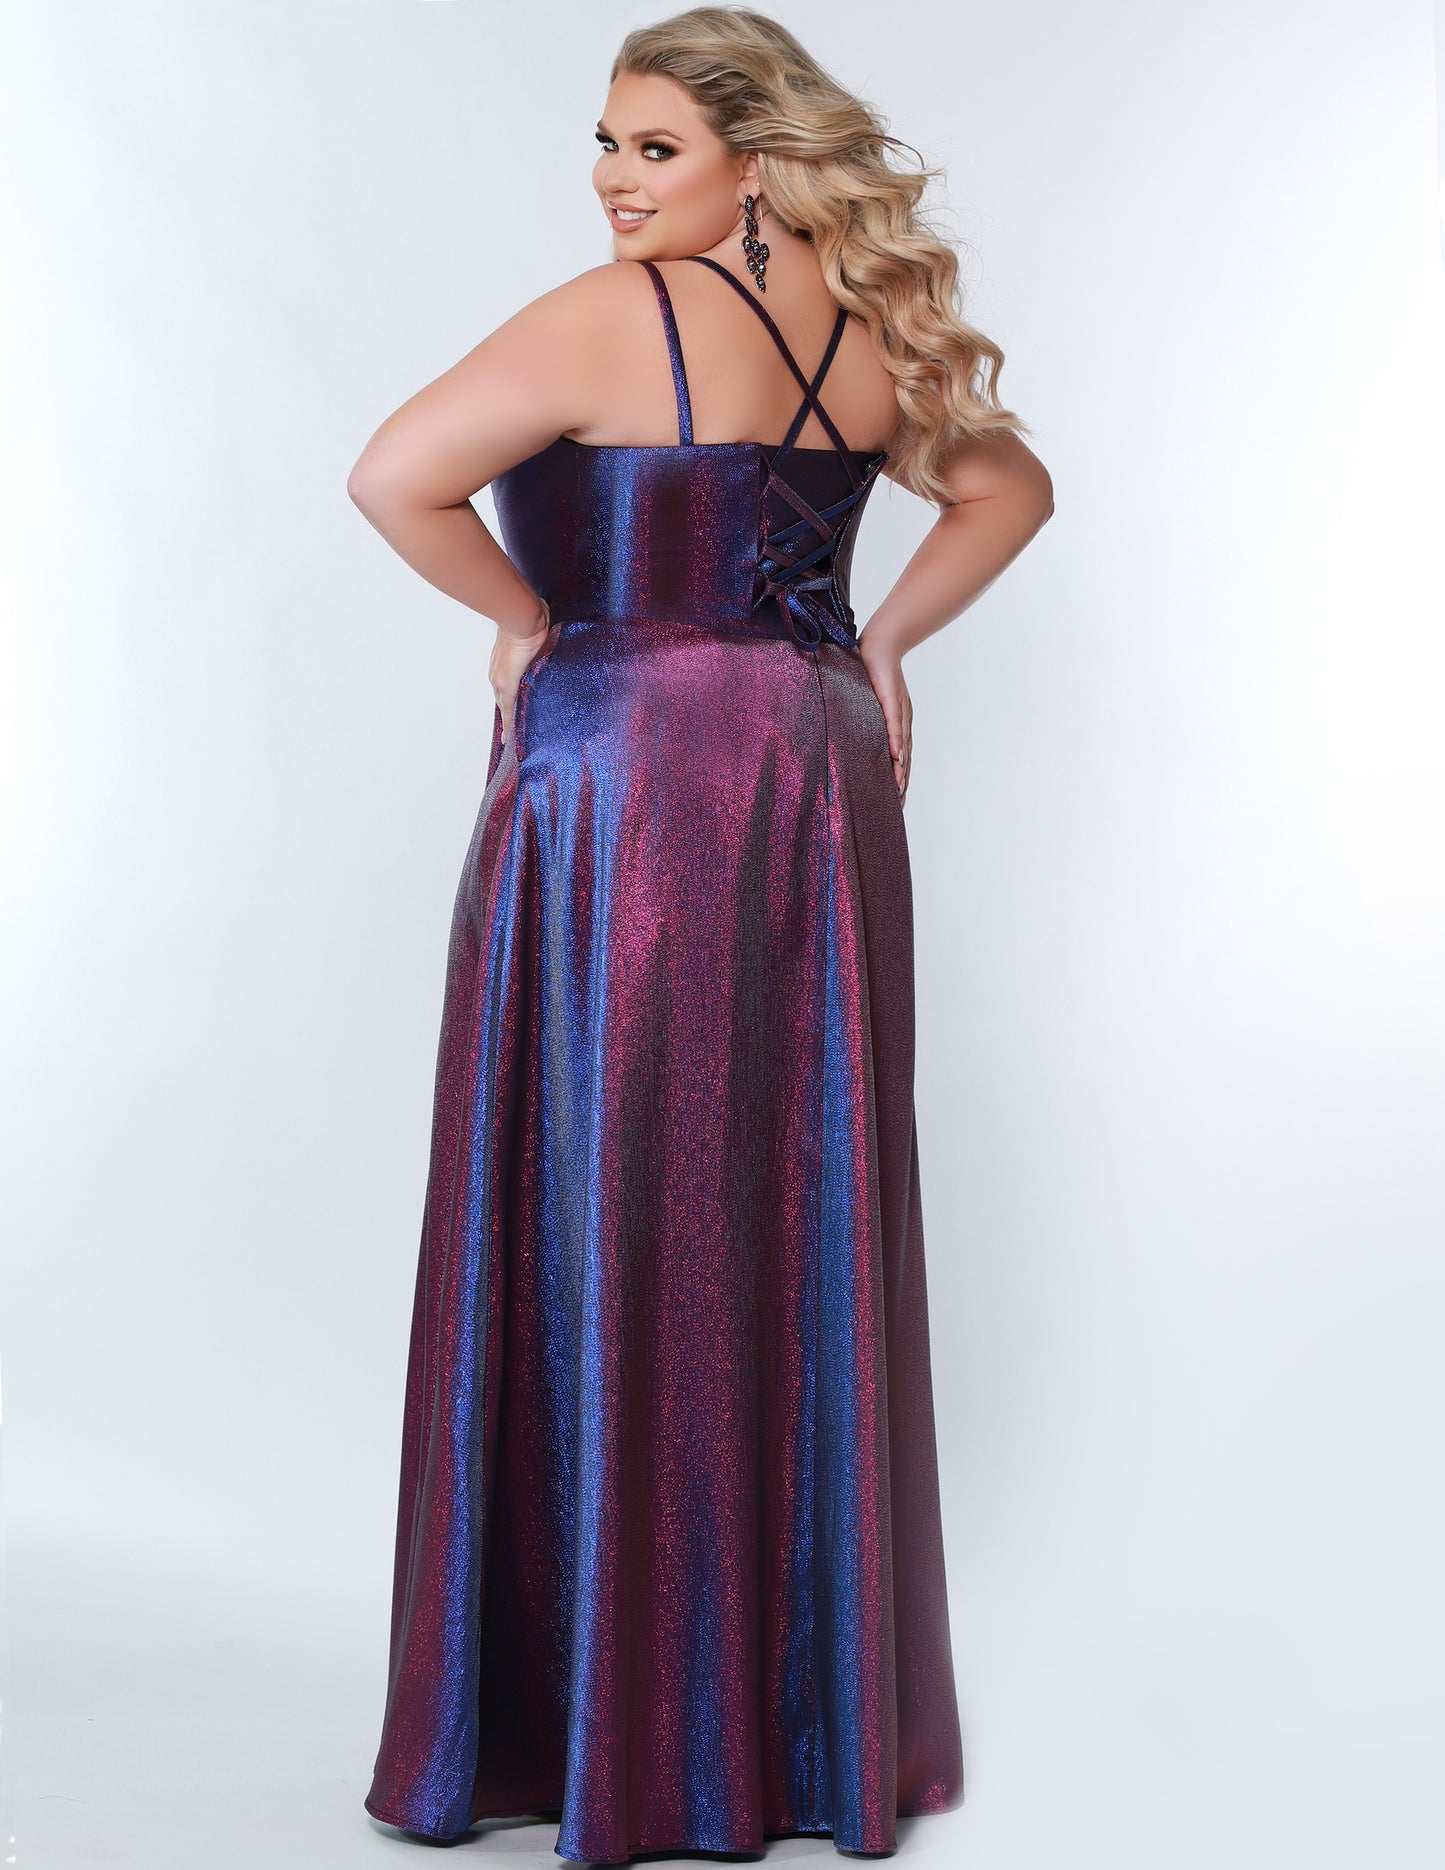 Sydney's Closet SC7344 prom dress delivers a modern and romantic look with its shimmer satin fabric, scoop neckline, A-line silhouette, and corset bodice with side slit. Perfect for making a statement on special occasions.  SC7344